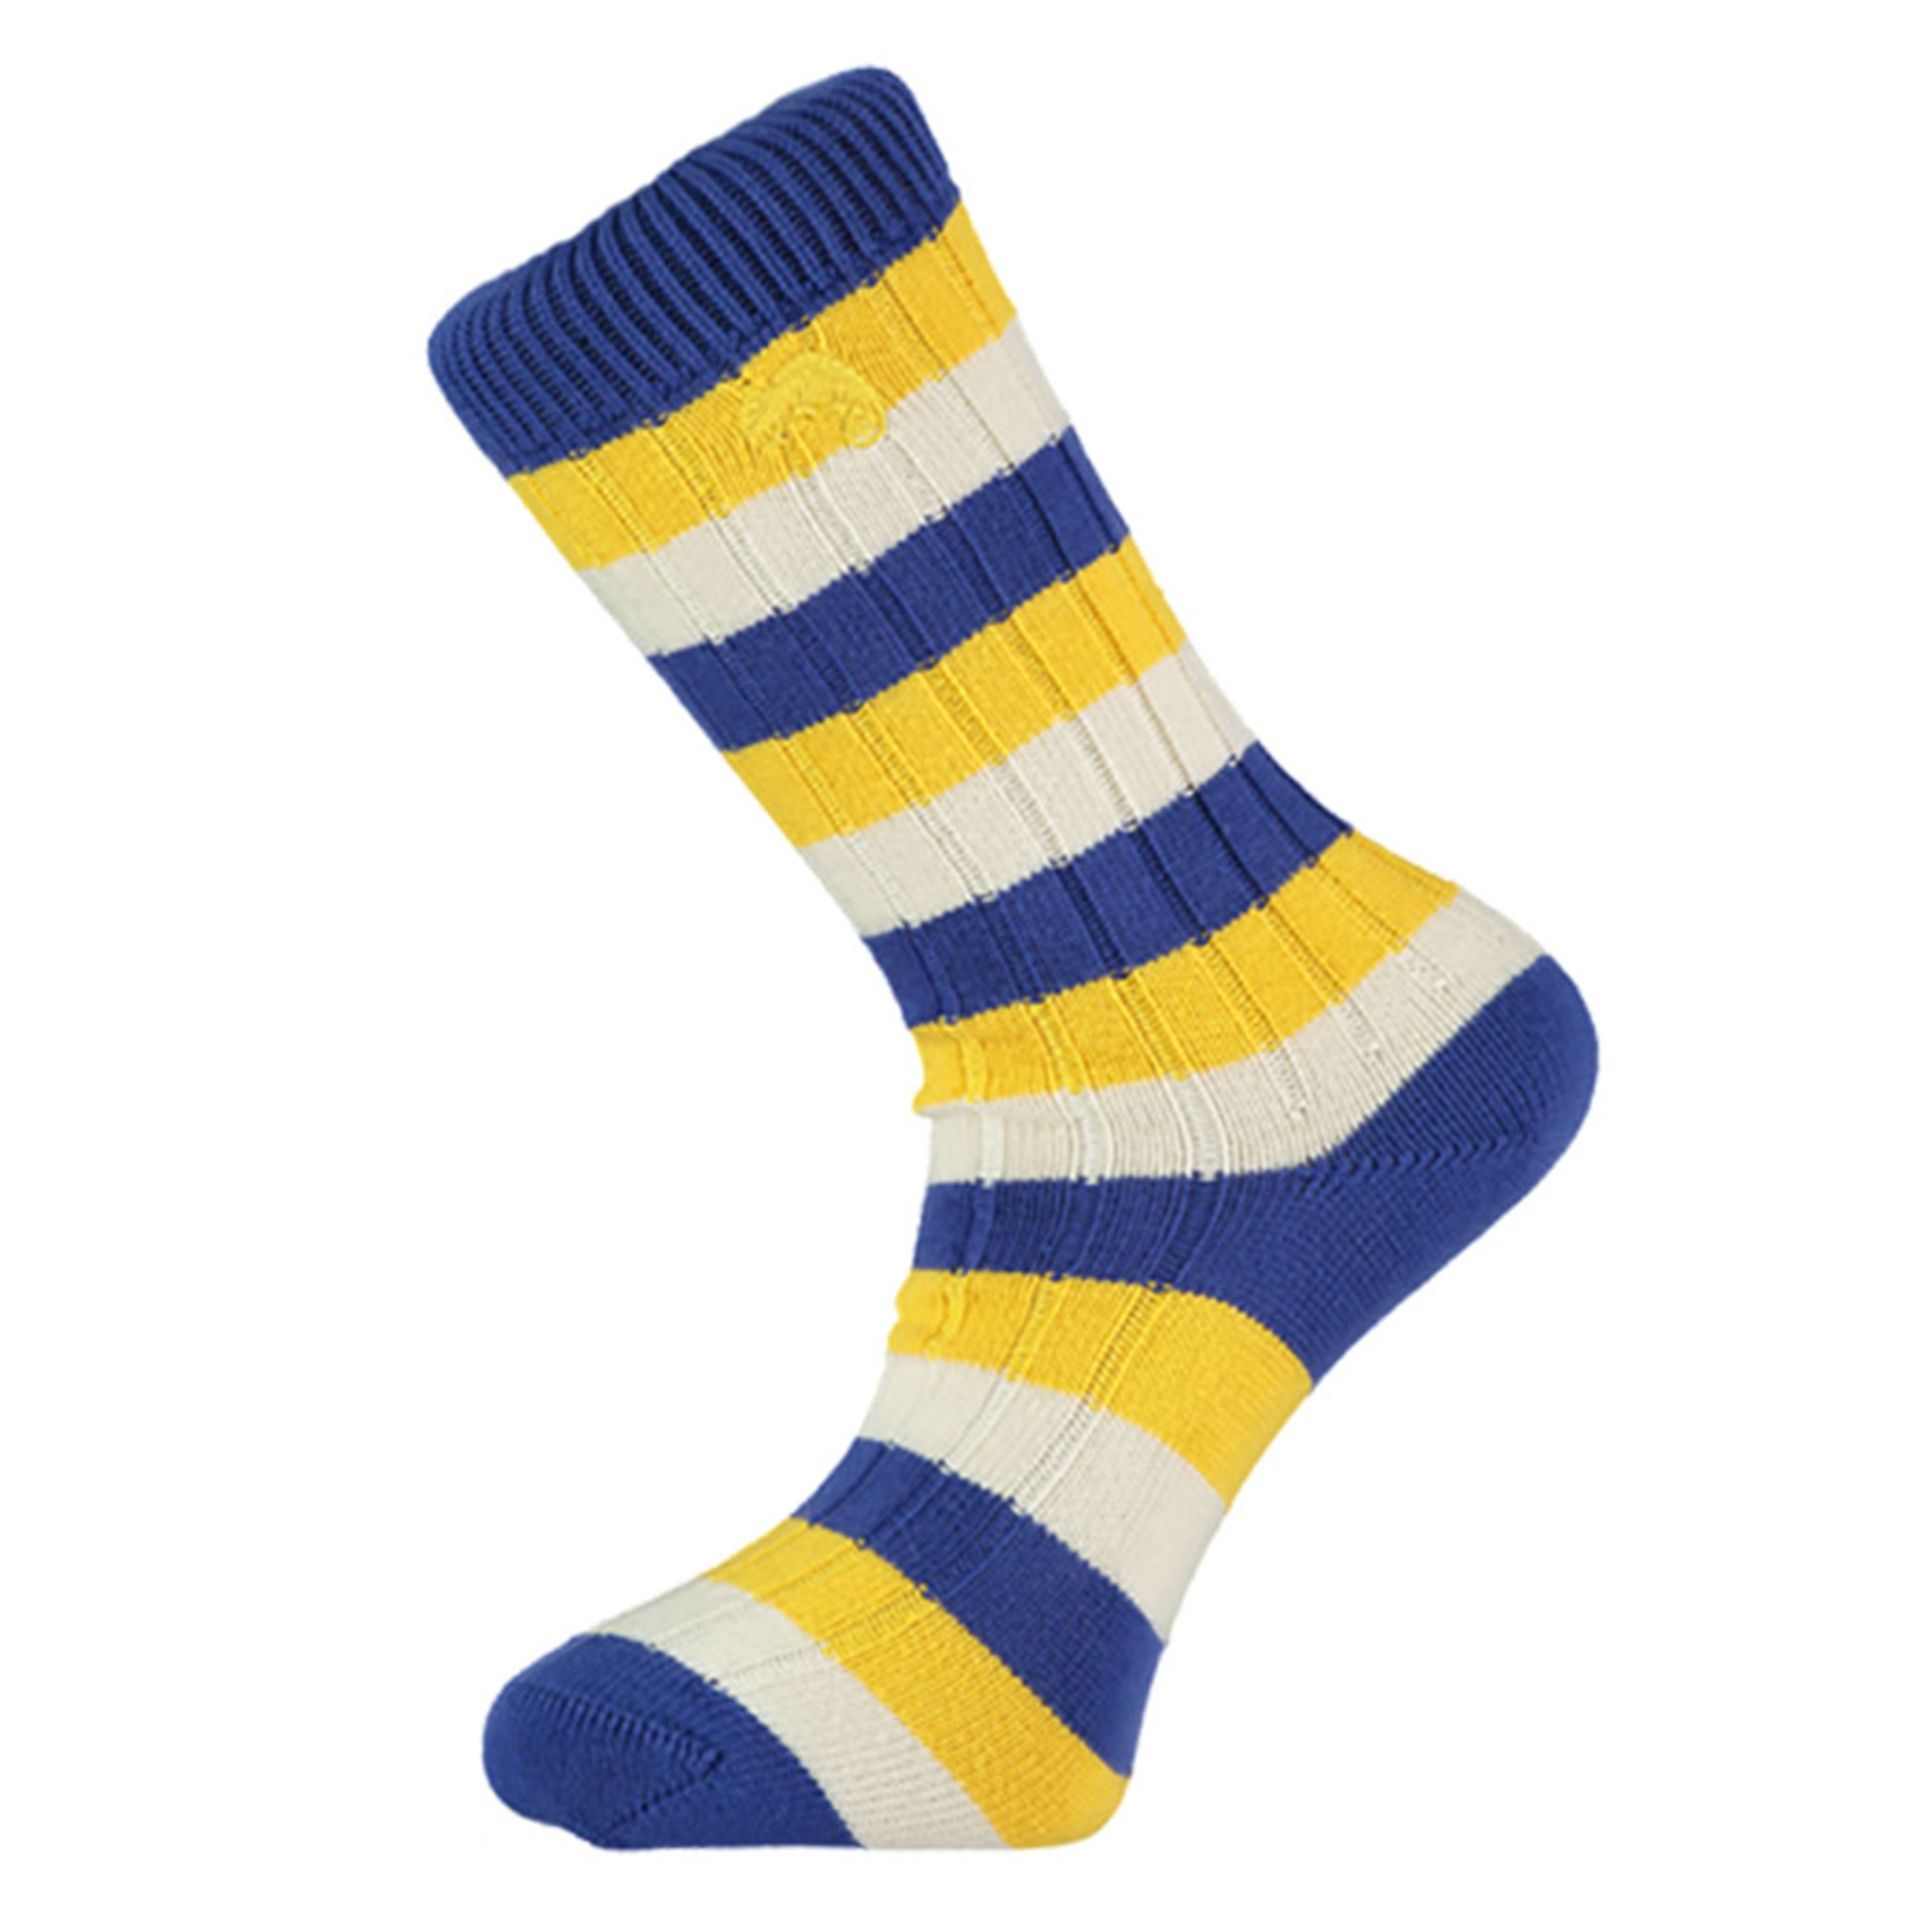 Approximately 5930 Pairs of Gents Socks, majority 94% cotton, sizes 3 ½ - 6 ½ & 7 – 11, various - Image 8 of 46